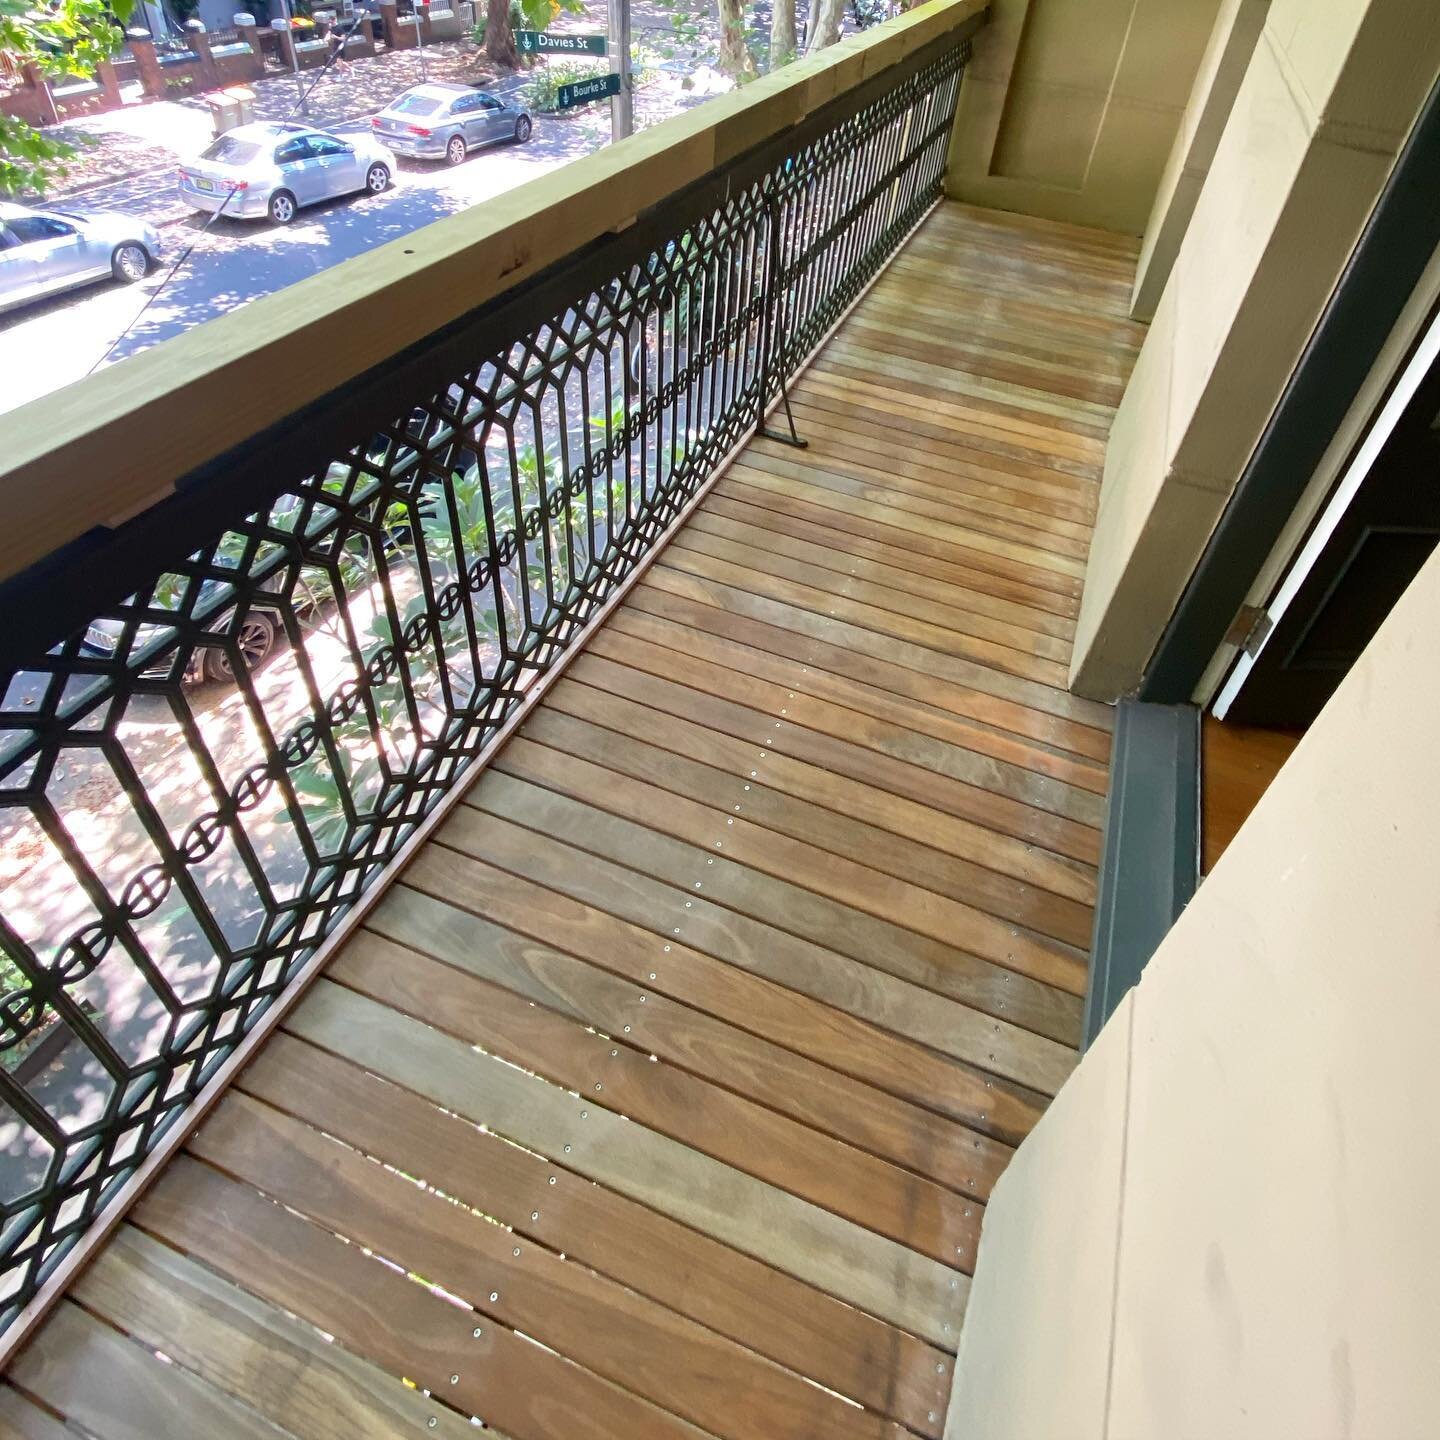 Our recently completed project at Surry Hills. 

Spottted Gum decking installed to this balcony deck! Swipe to see the before and after photos! 

Contact us on 0434039844 for your next project!